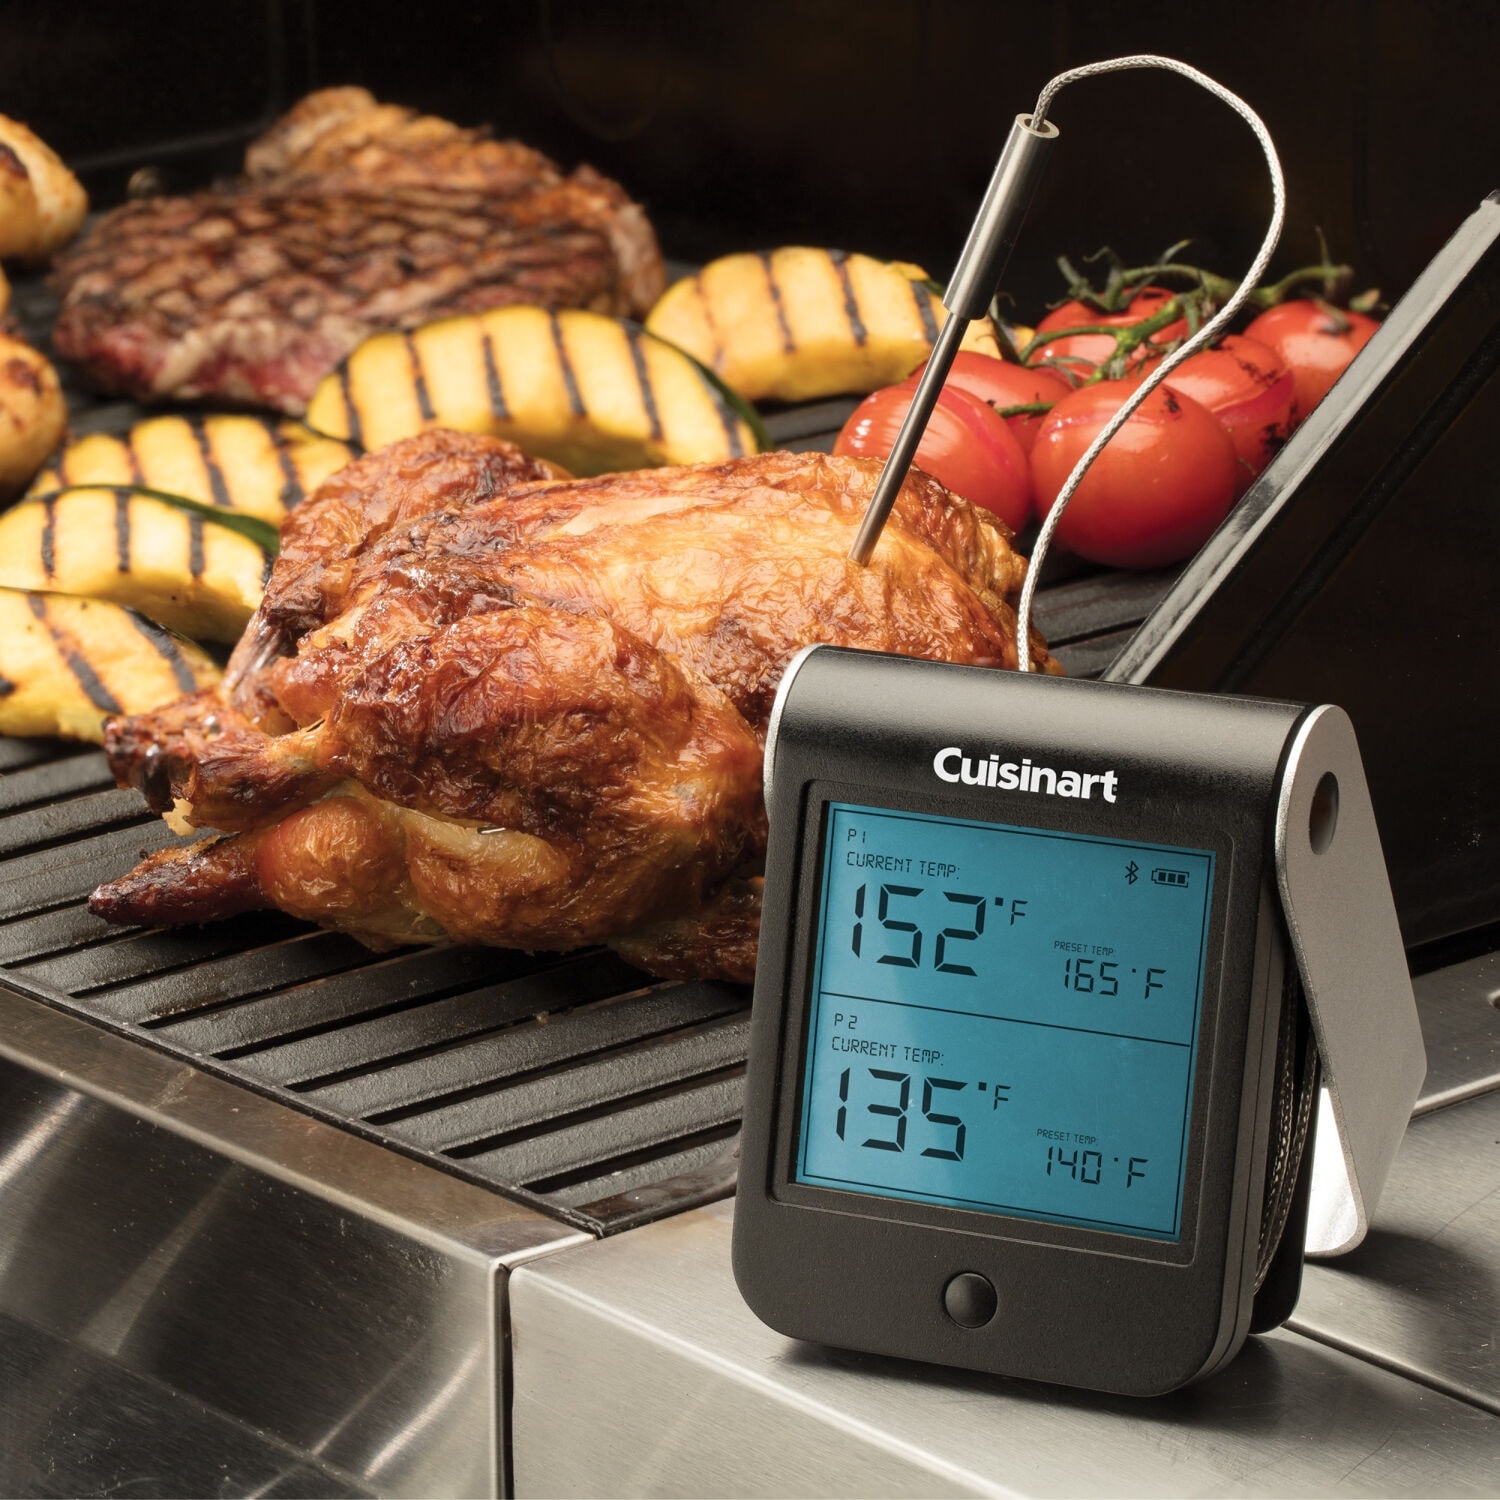 https://ak1.ostkcdn.com/images/products/is/images/direct/3cca020ea9cbbfca6982433d46978a8b91f84acc/Cuisinart-Bluetooth-Easy-Connect-Thermometer-with-2-Meat-Probes.jpg